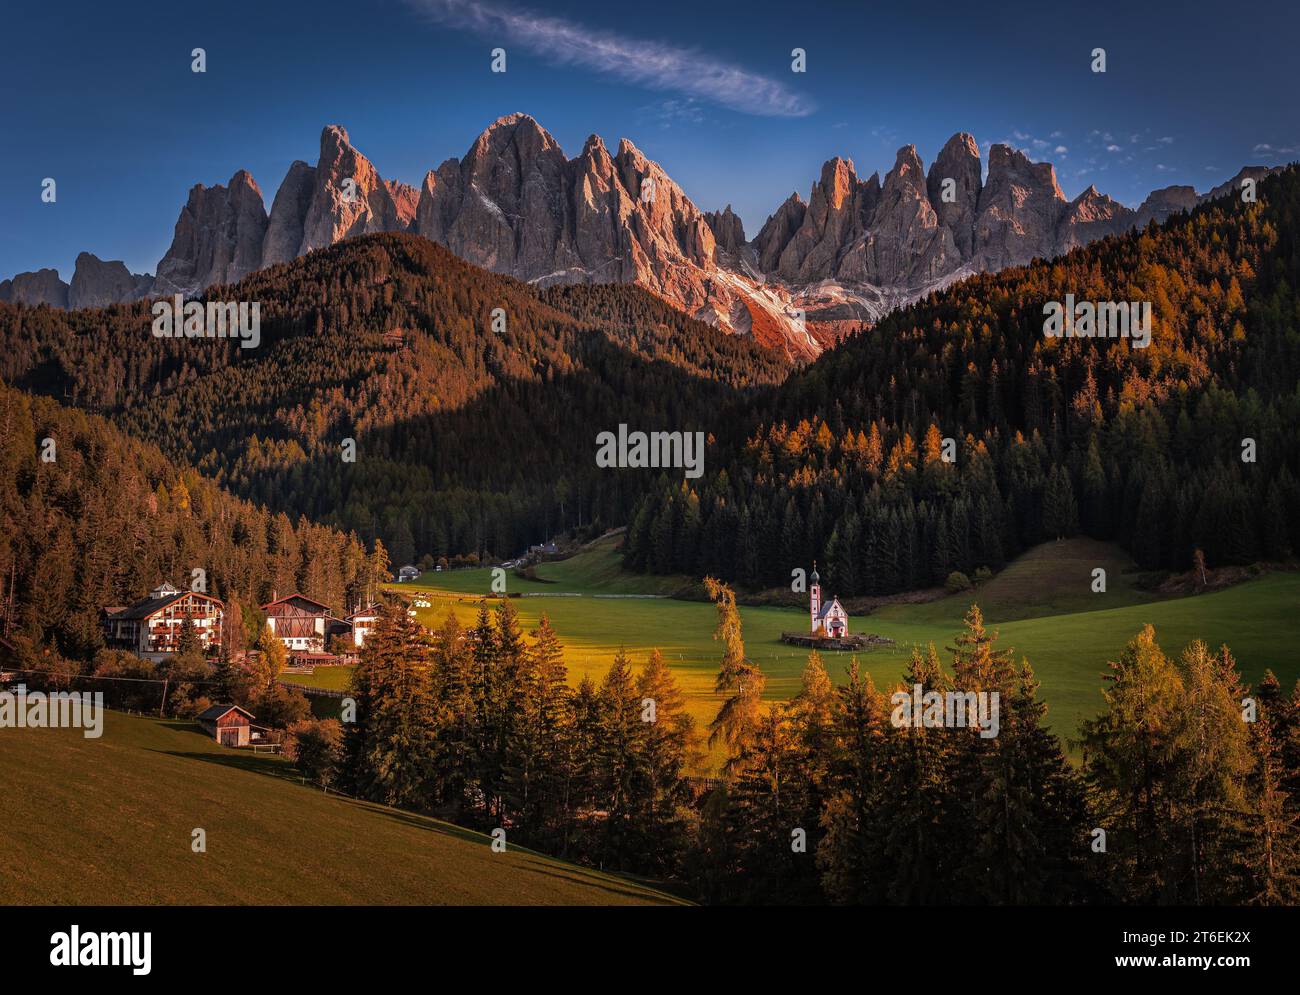 Val Di Funes, Dolomites, Italy - Autumn view of St. Johann Church (Chiesetta di San Giovanni in Ranui) at South Tyrol with the Italian Dolomites in wa Stock Photo